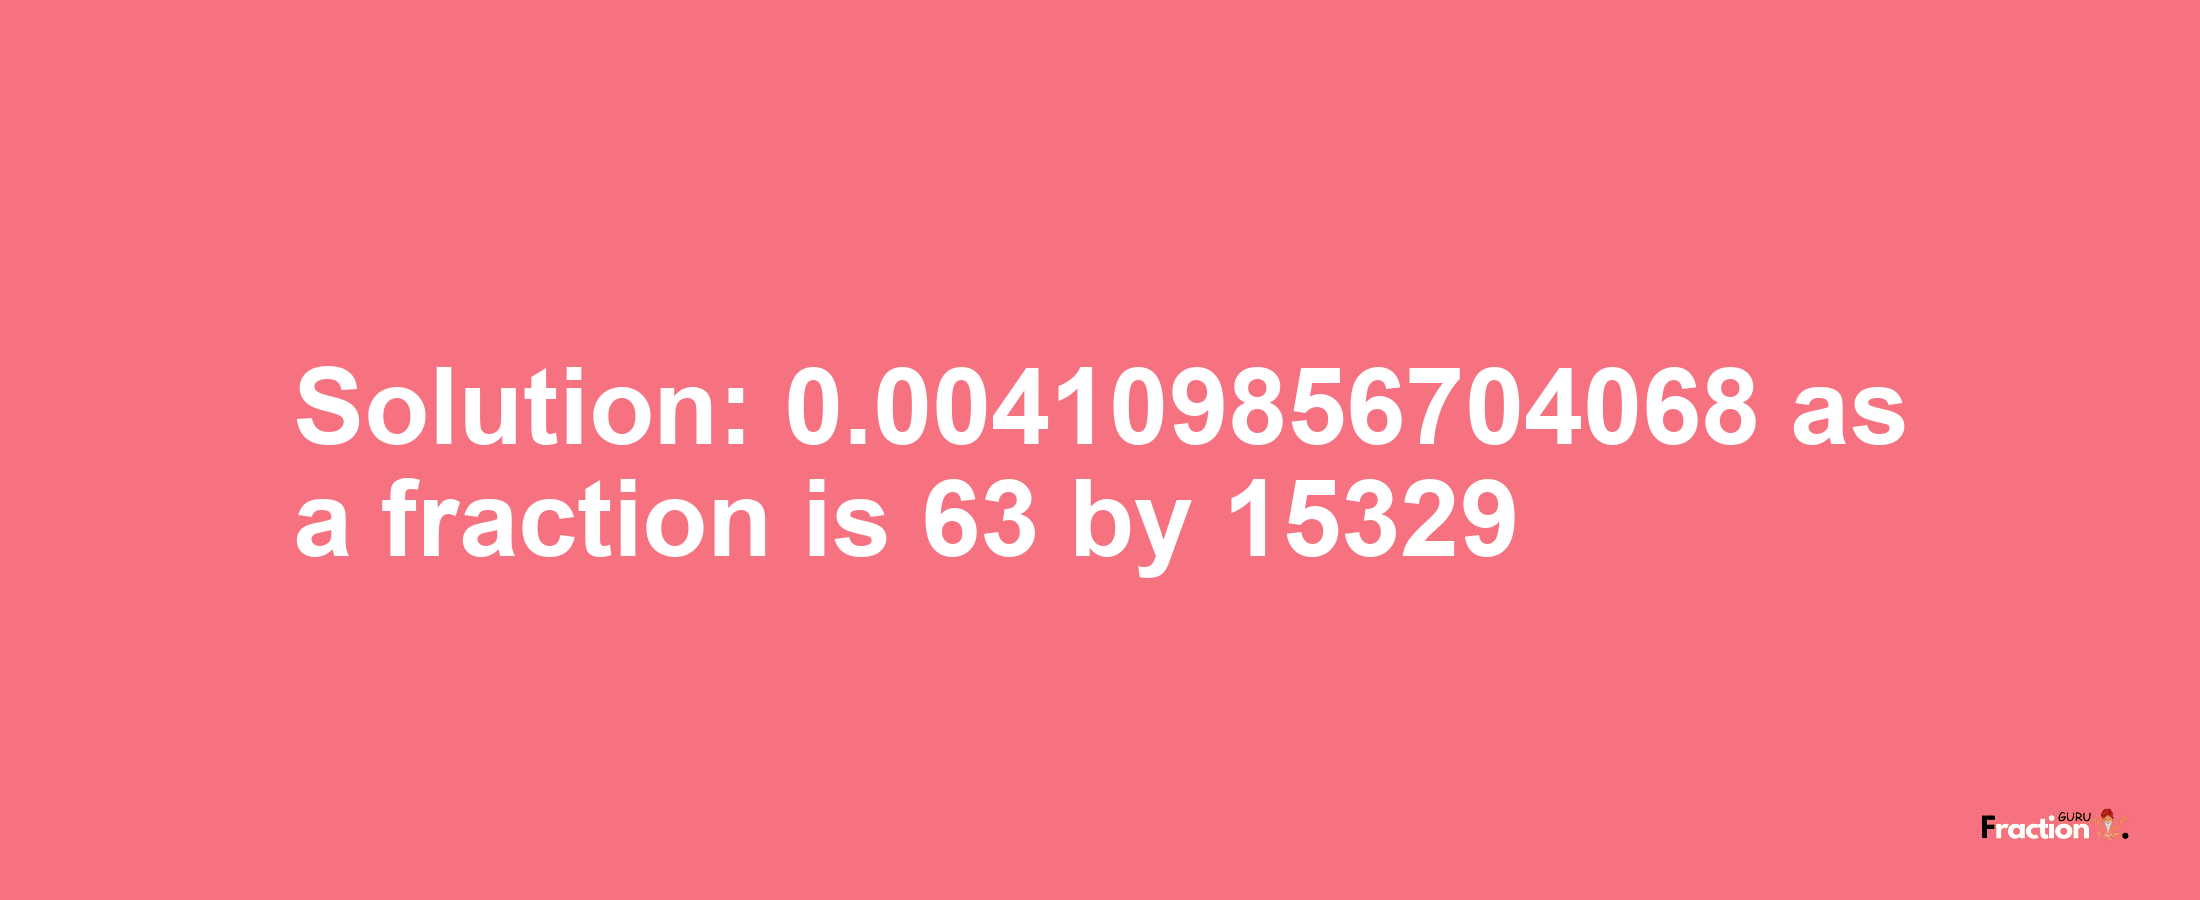 Solution:0.004109856704068 as a fraction is 63/15329